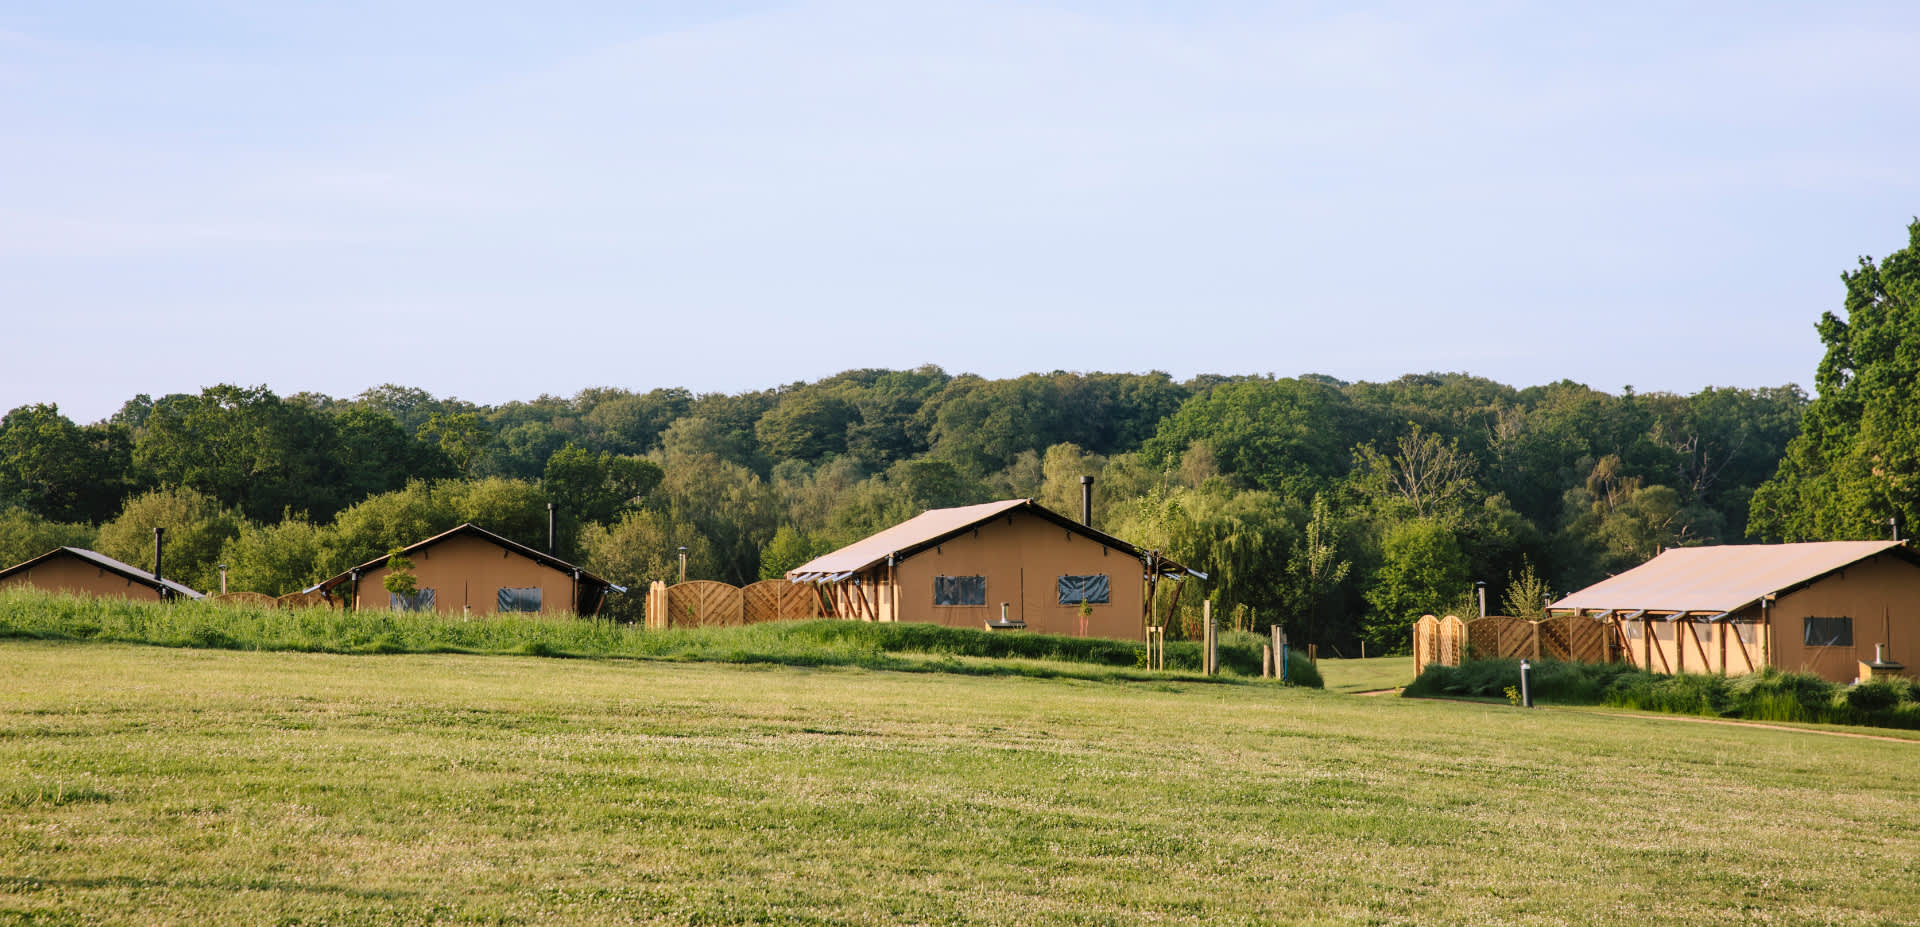 Safari lodges at Green Hill Holiday Village in the New Forest